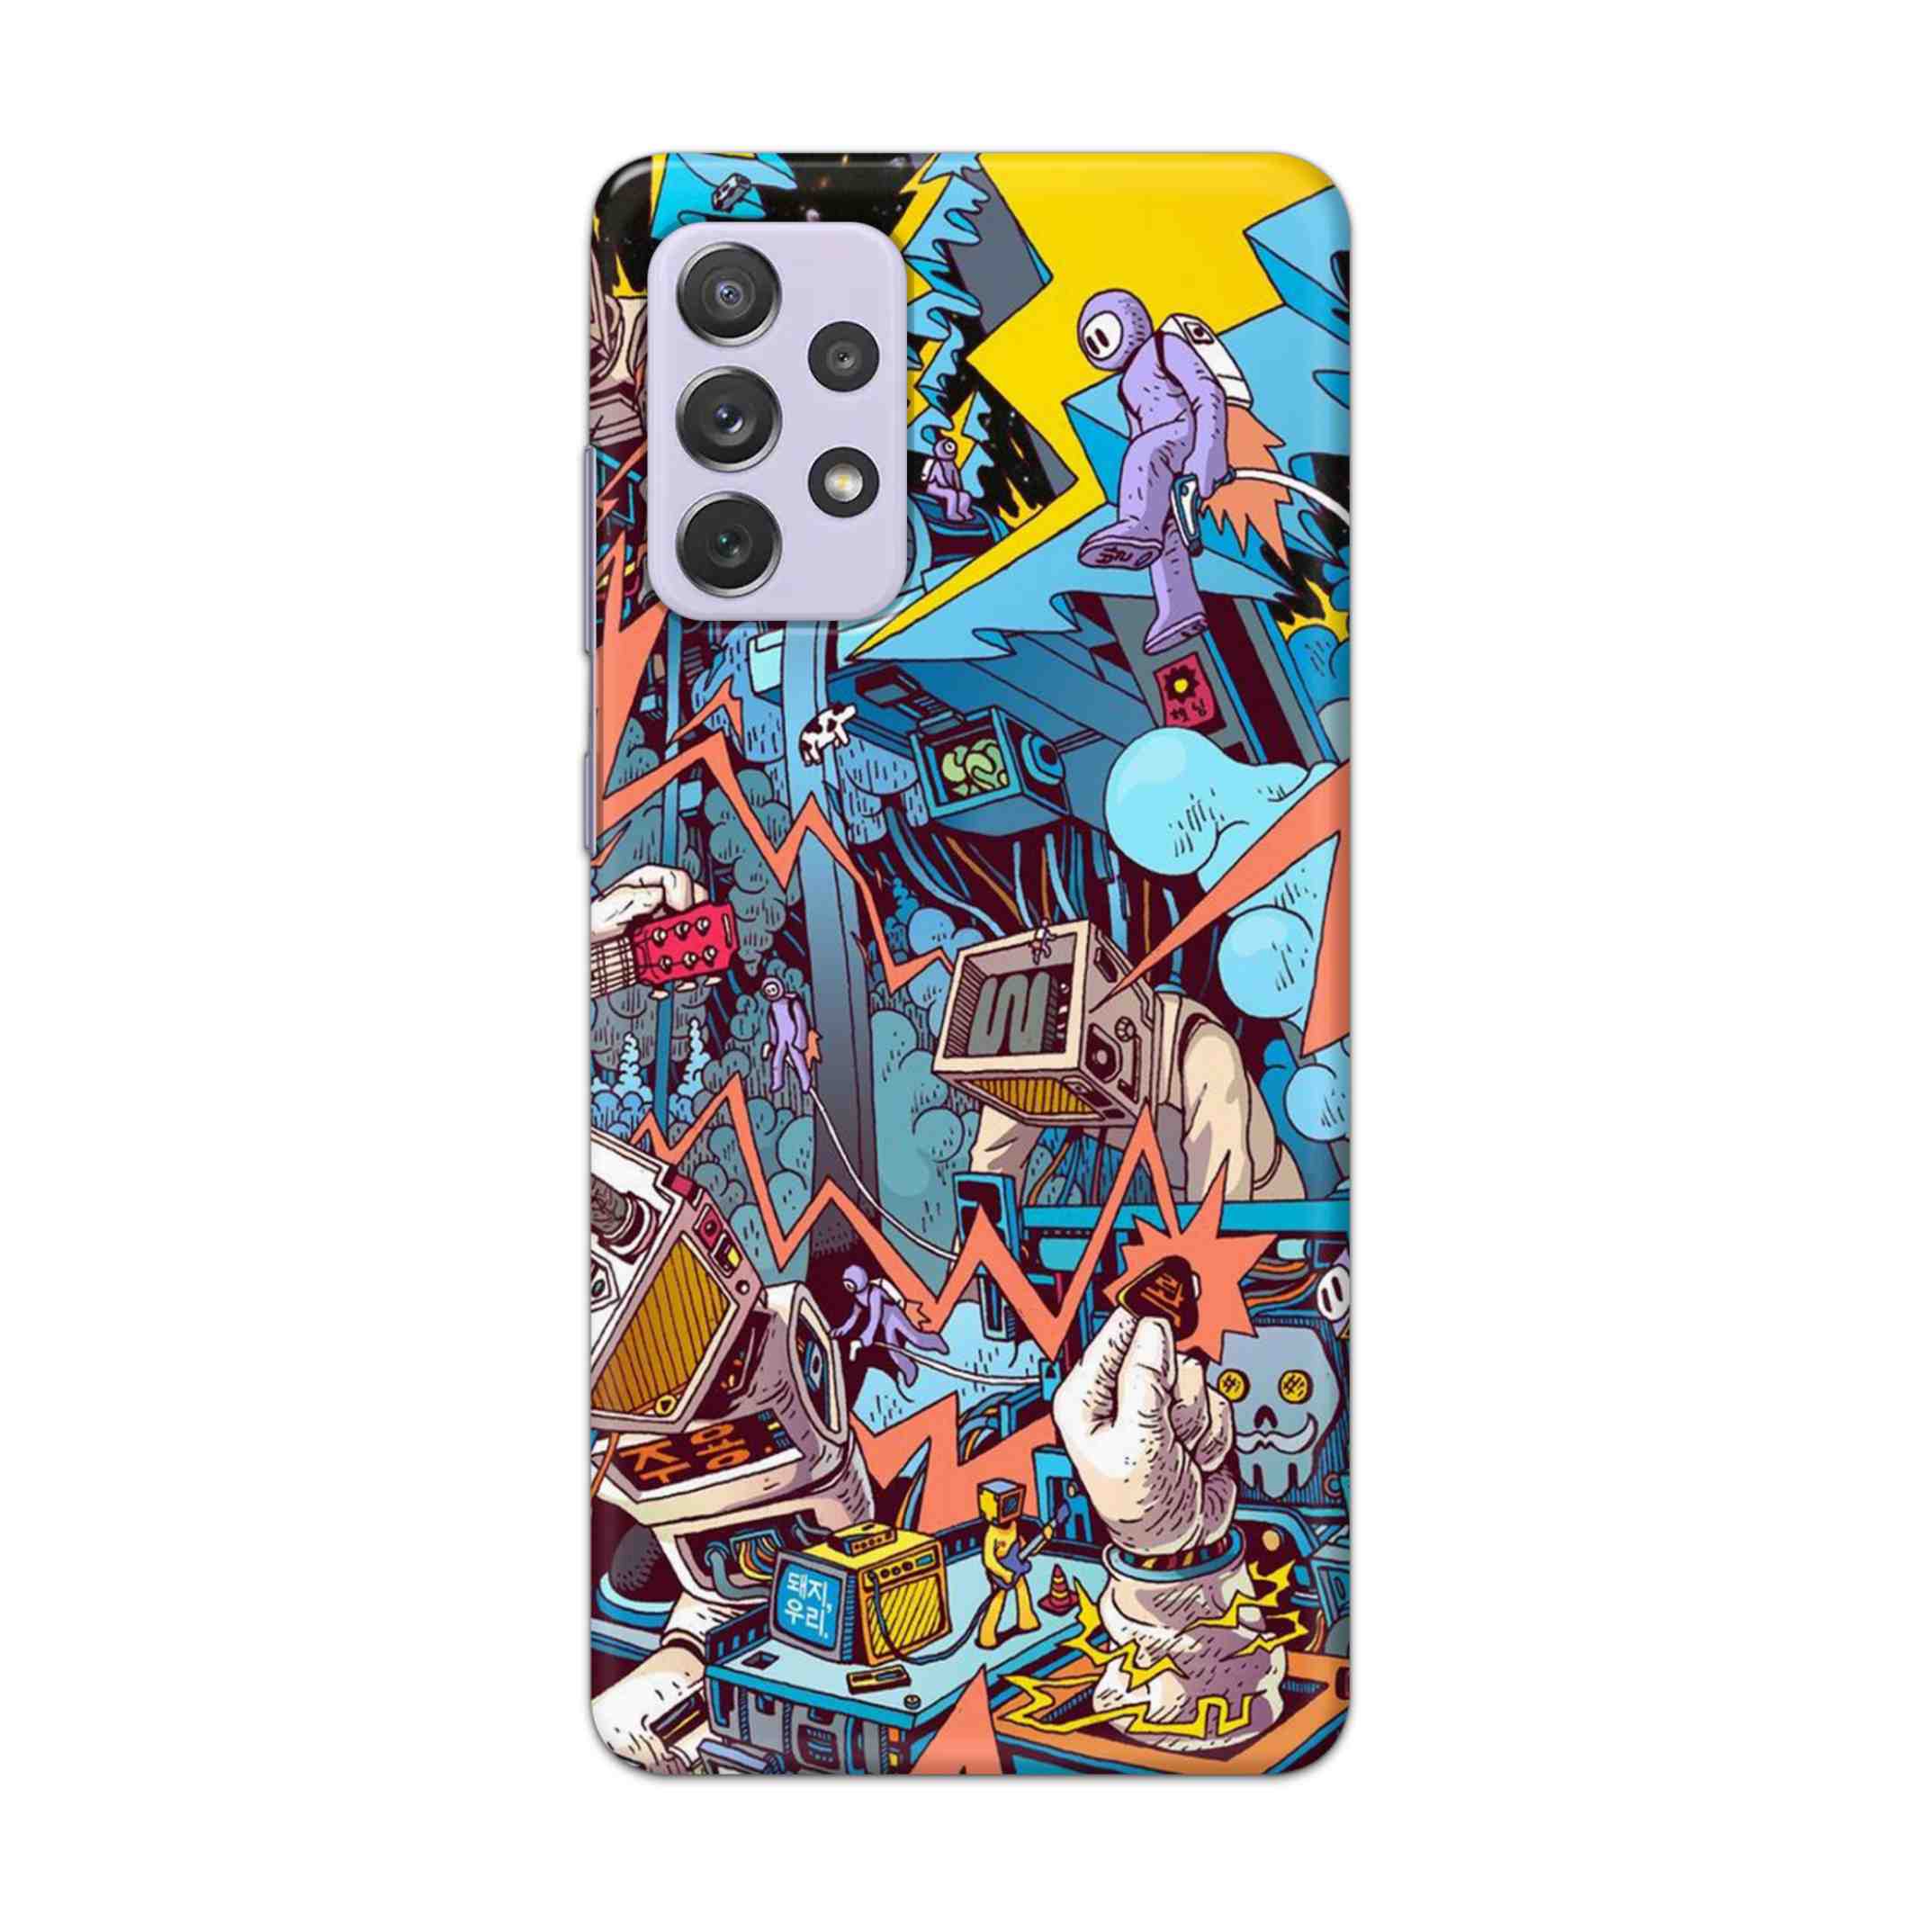 Buy Ofo Panic Hard Back Mobile Phone Case Cover For Samsung Galaxy A72 Online